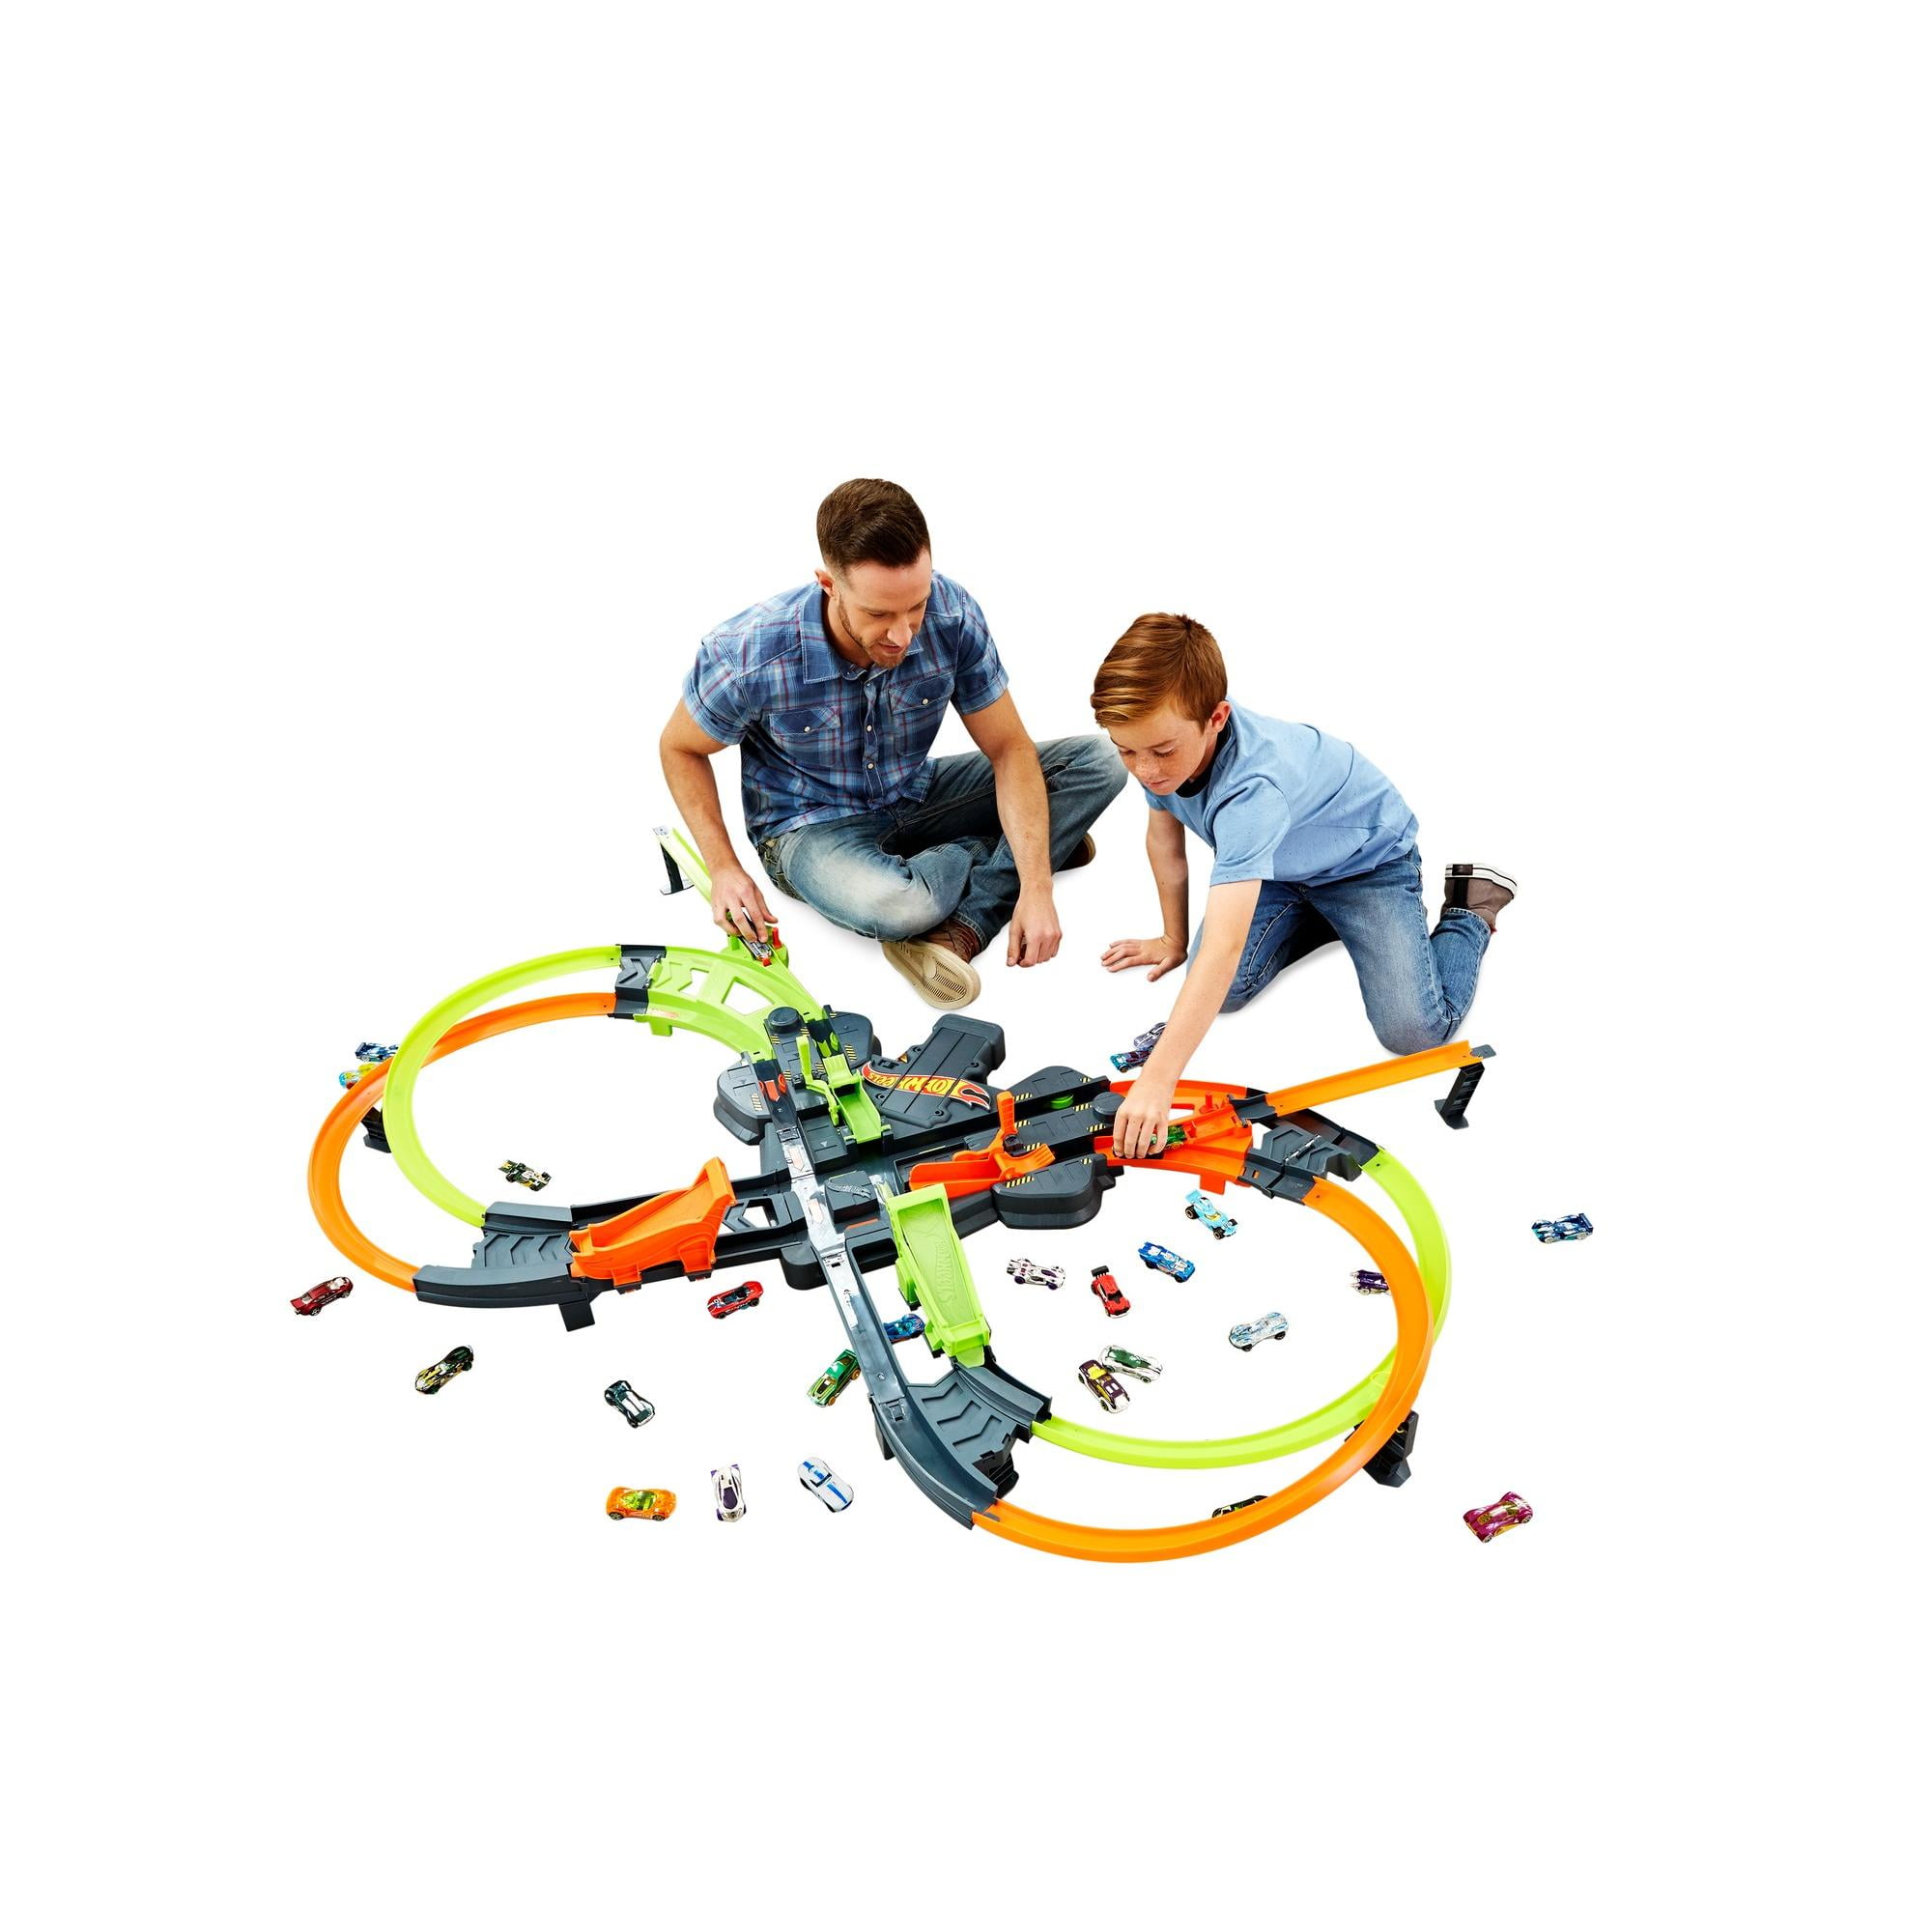 Hot Wheels Power Shift Raceway Track Set With 5 Cars E2d for sale online 